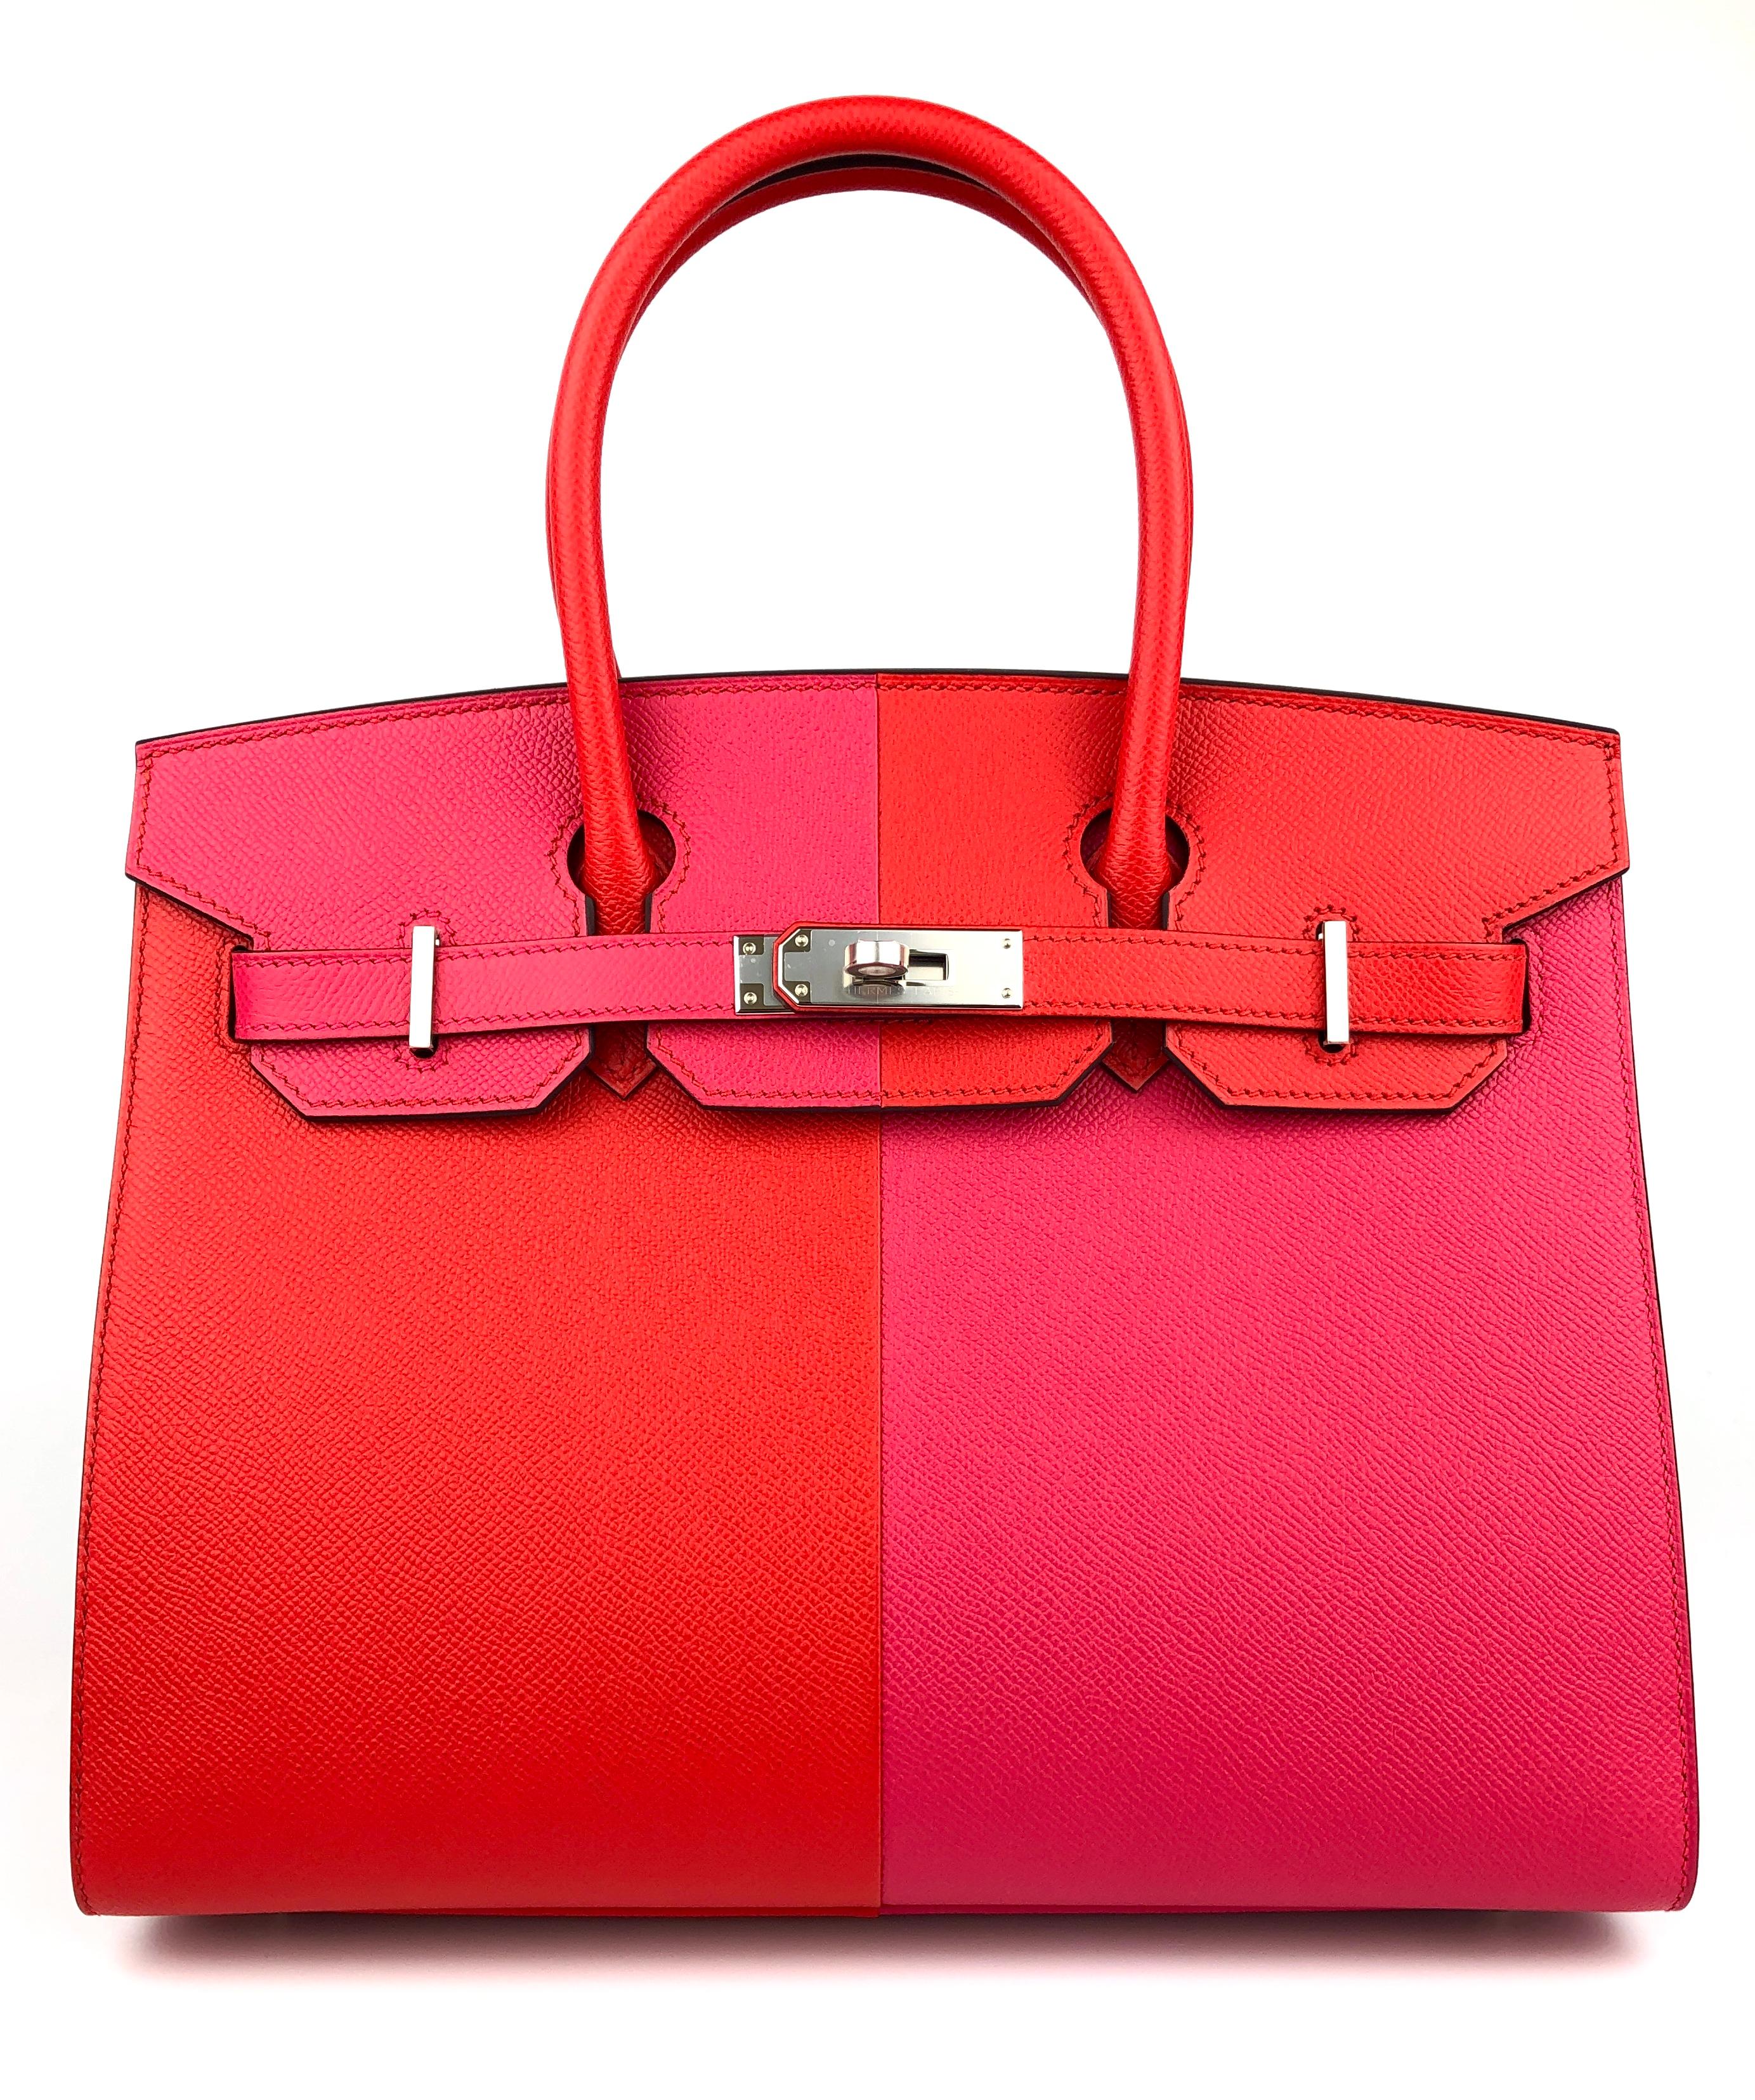 As New Absolutely Stunning Rare Limited Edition Hermes Birkin 30 Sellier Casaque Tricolor Rouge de Coeur, Rose Extreme & Blue Zanzibar Interior. Complimented by Epsom Leather and Palladium Hardware. Y Stamp 2020. Includes Box and Dust bags. 

Shop